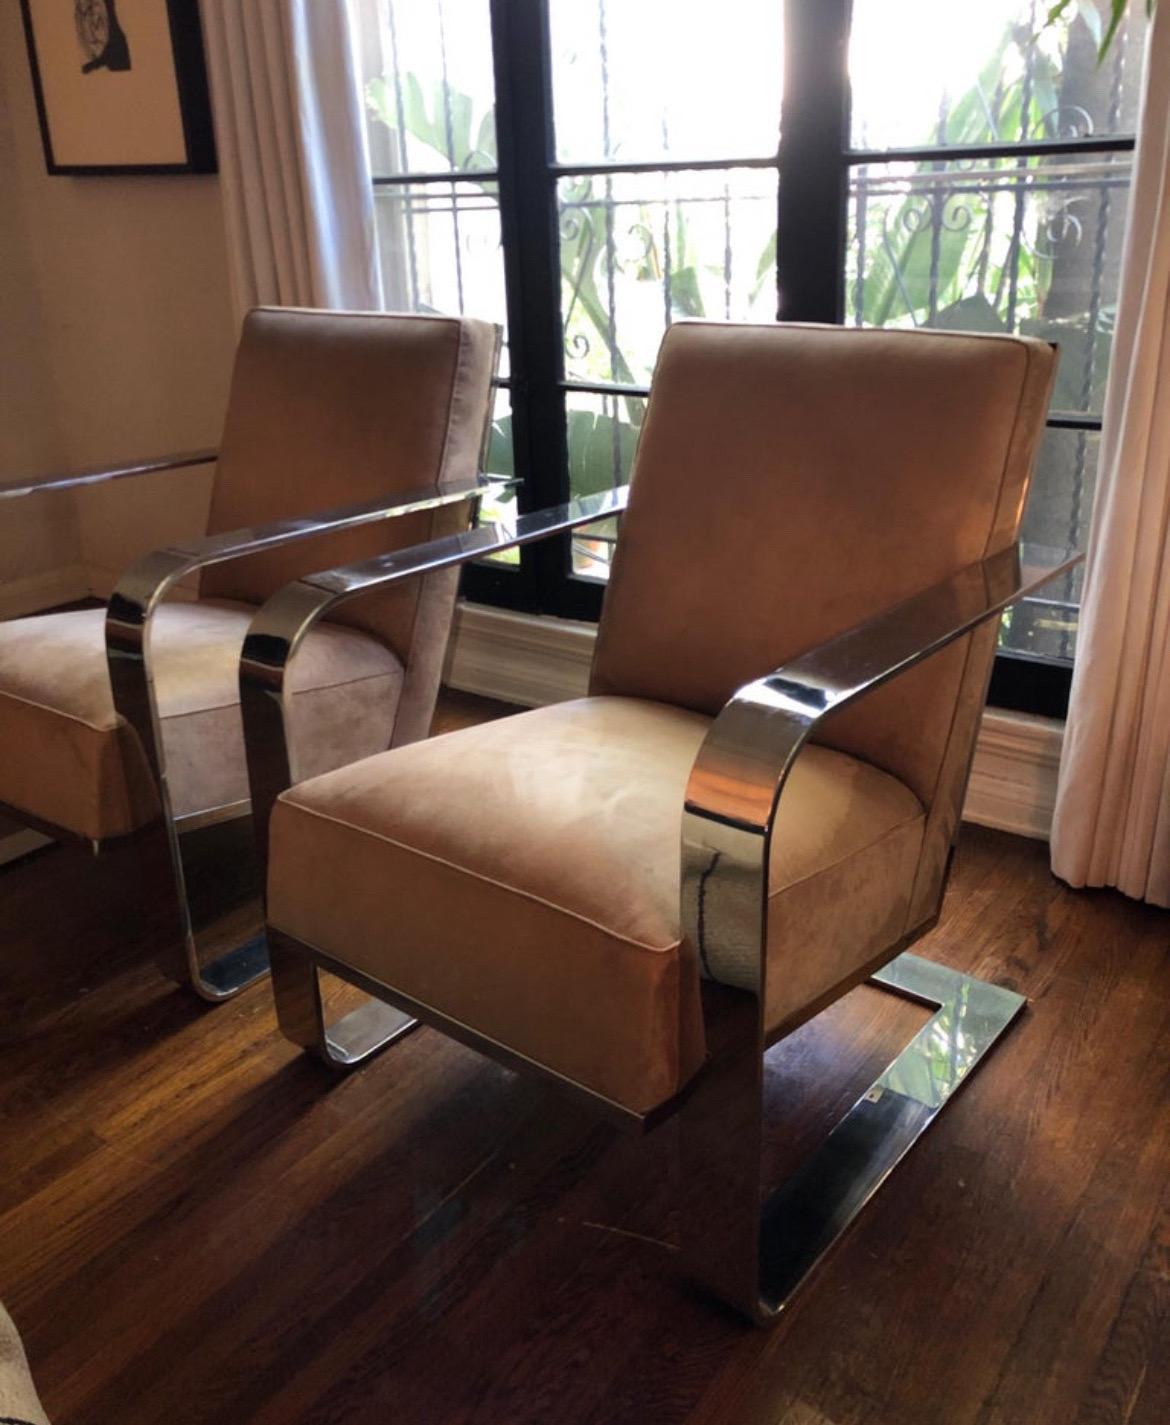 Sleek and sexy Ralph Lauren chrome lounge chair upholstered in a luxurious tan sued fabric. Impressive large presence balanced with reflective attributes and the aforementioned neutral color. The coveted chrome flat bar frame features oversized arm